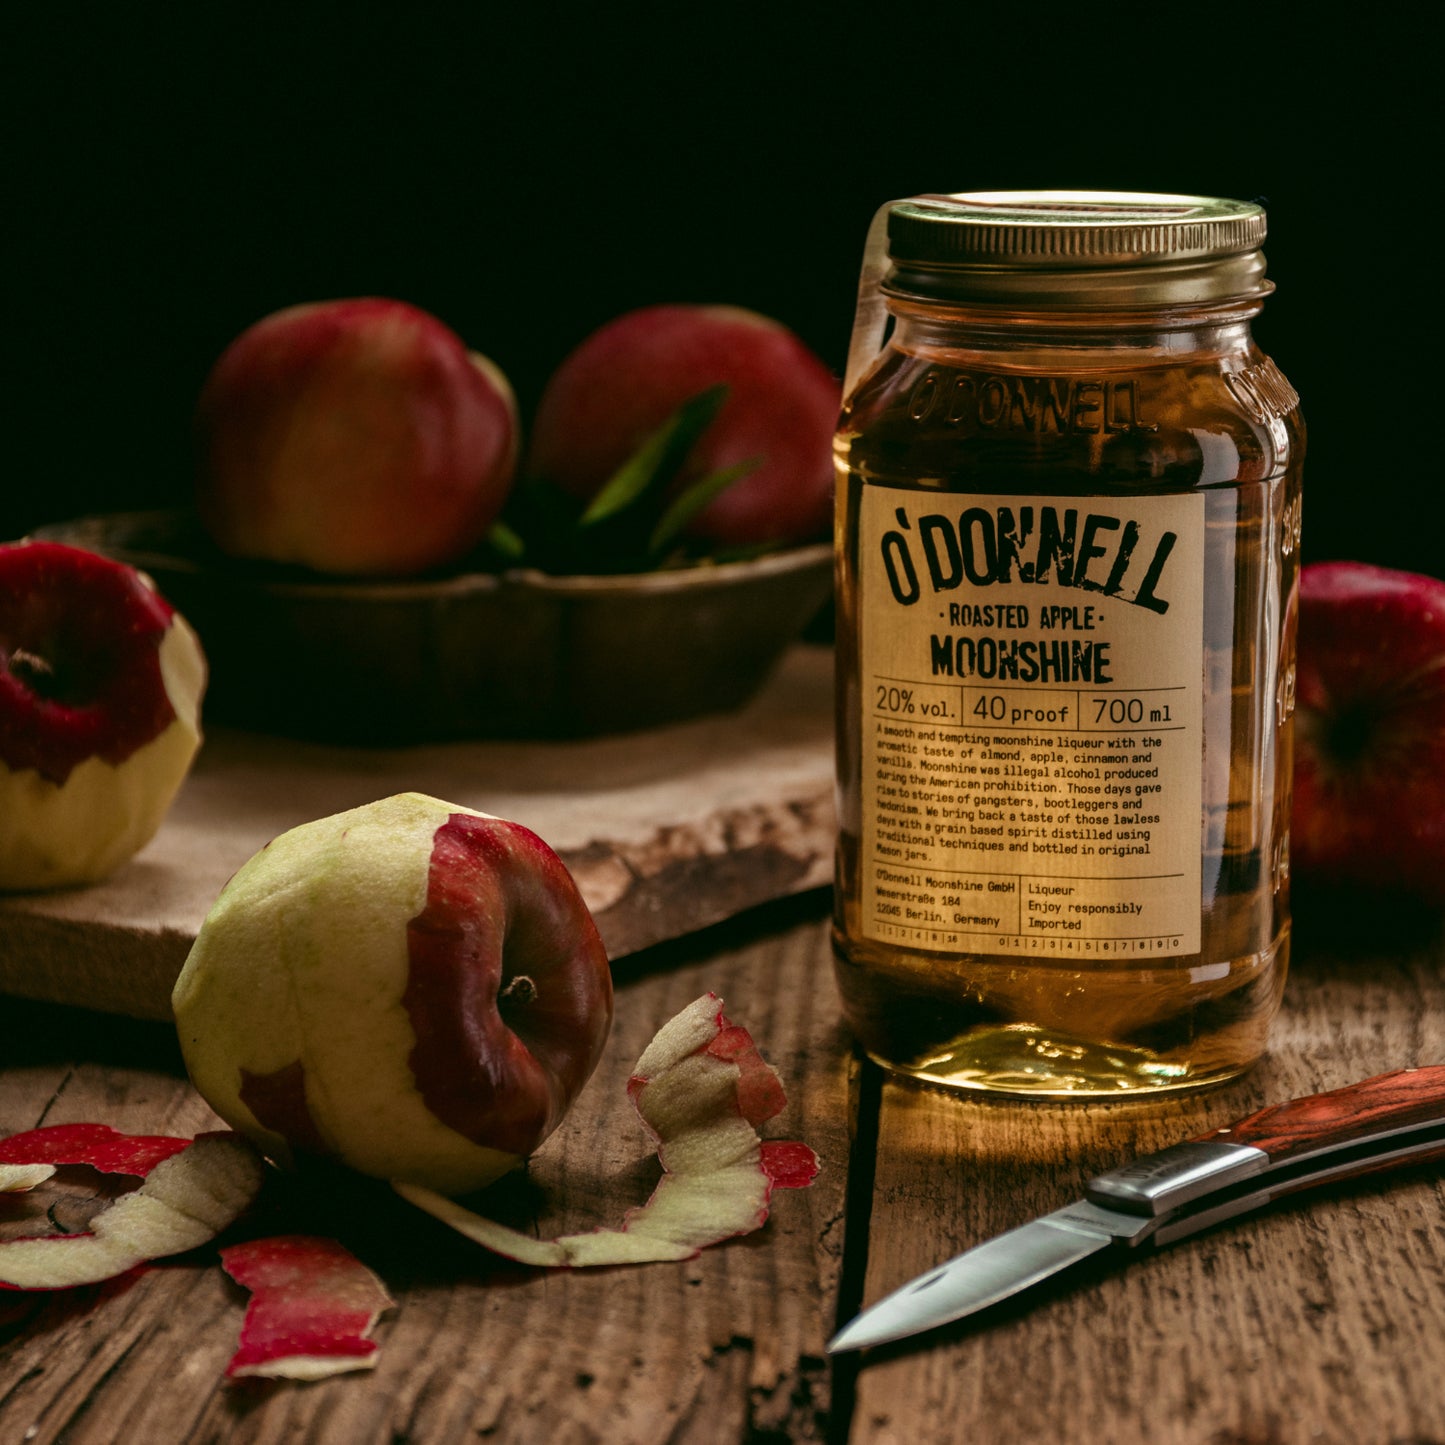 O'Donnell Moonshine Roasted Apple mood image with apples